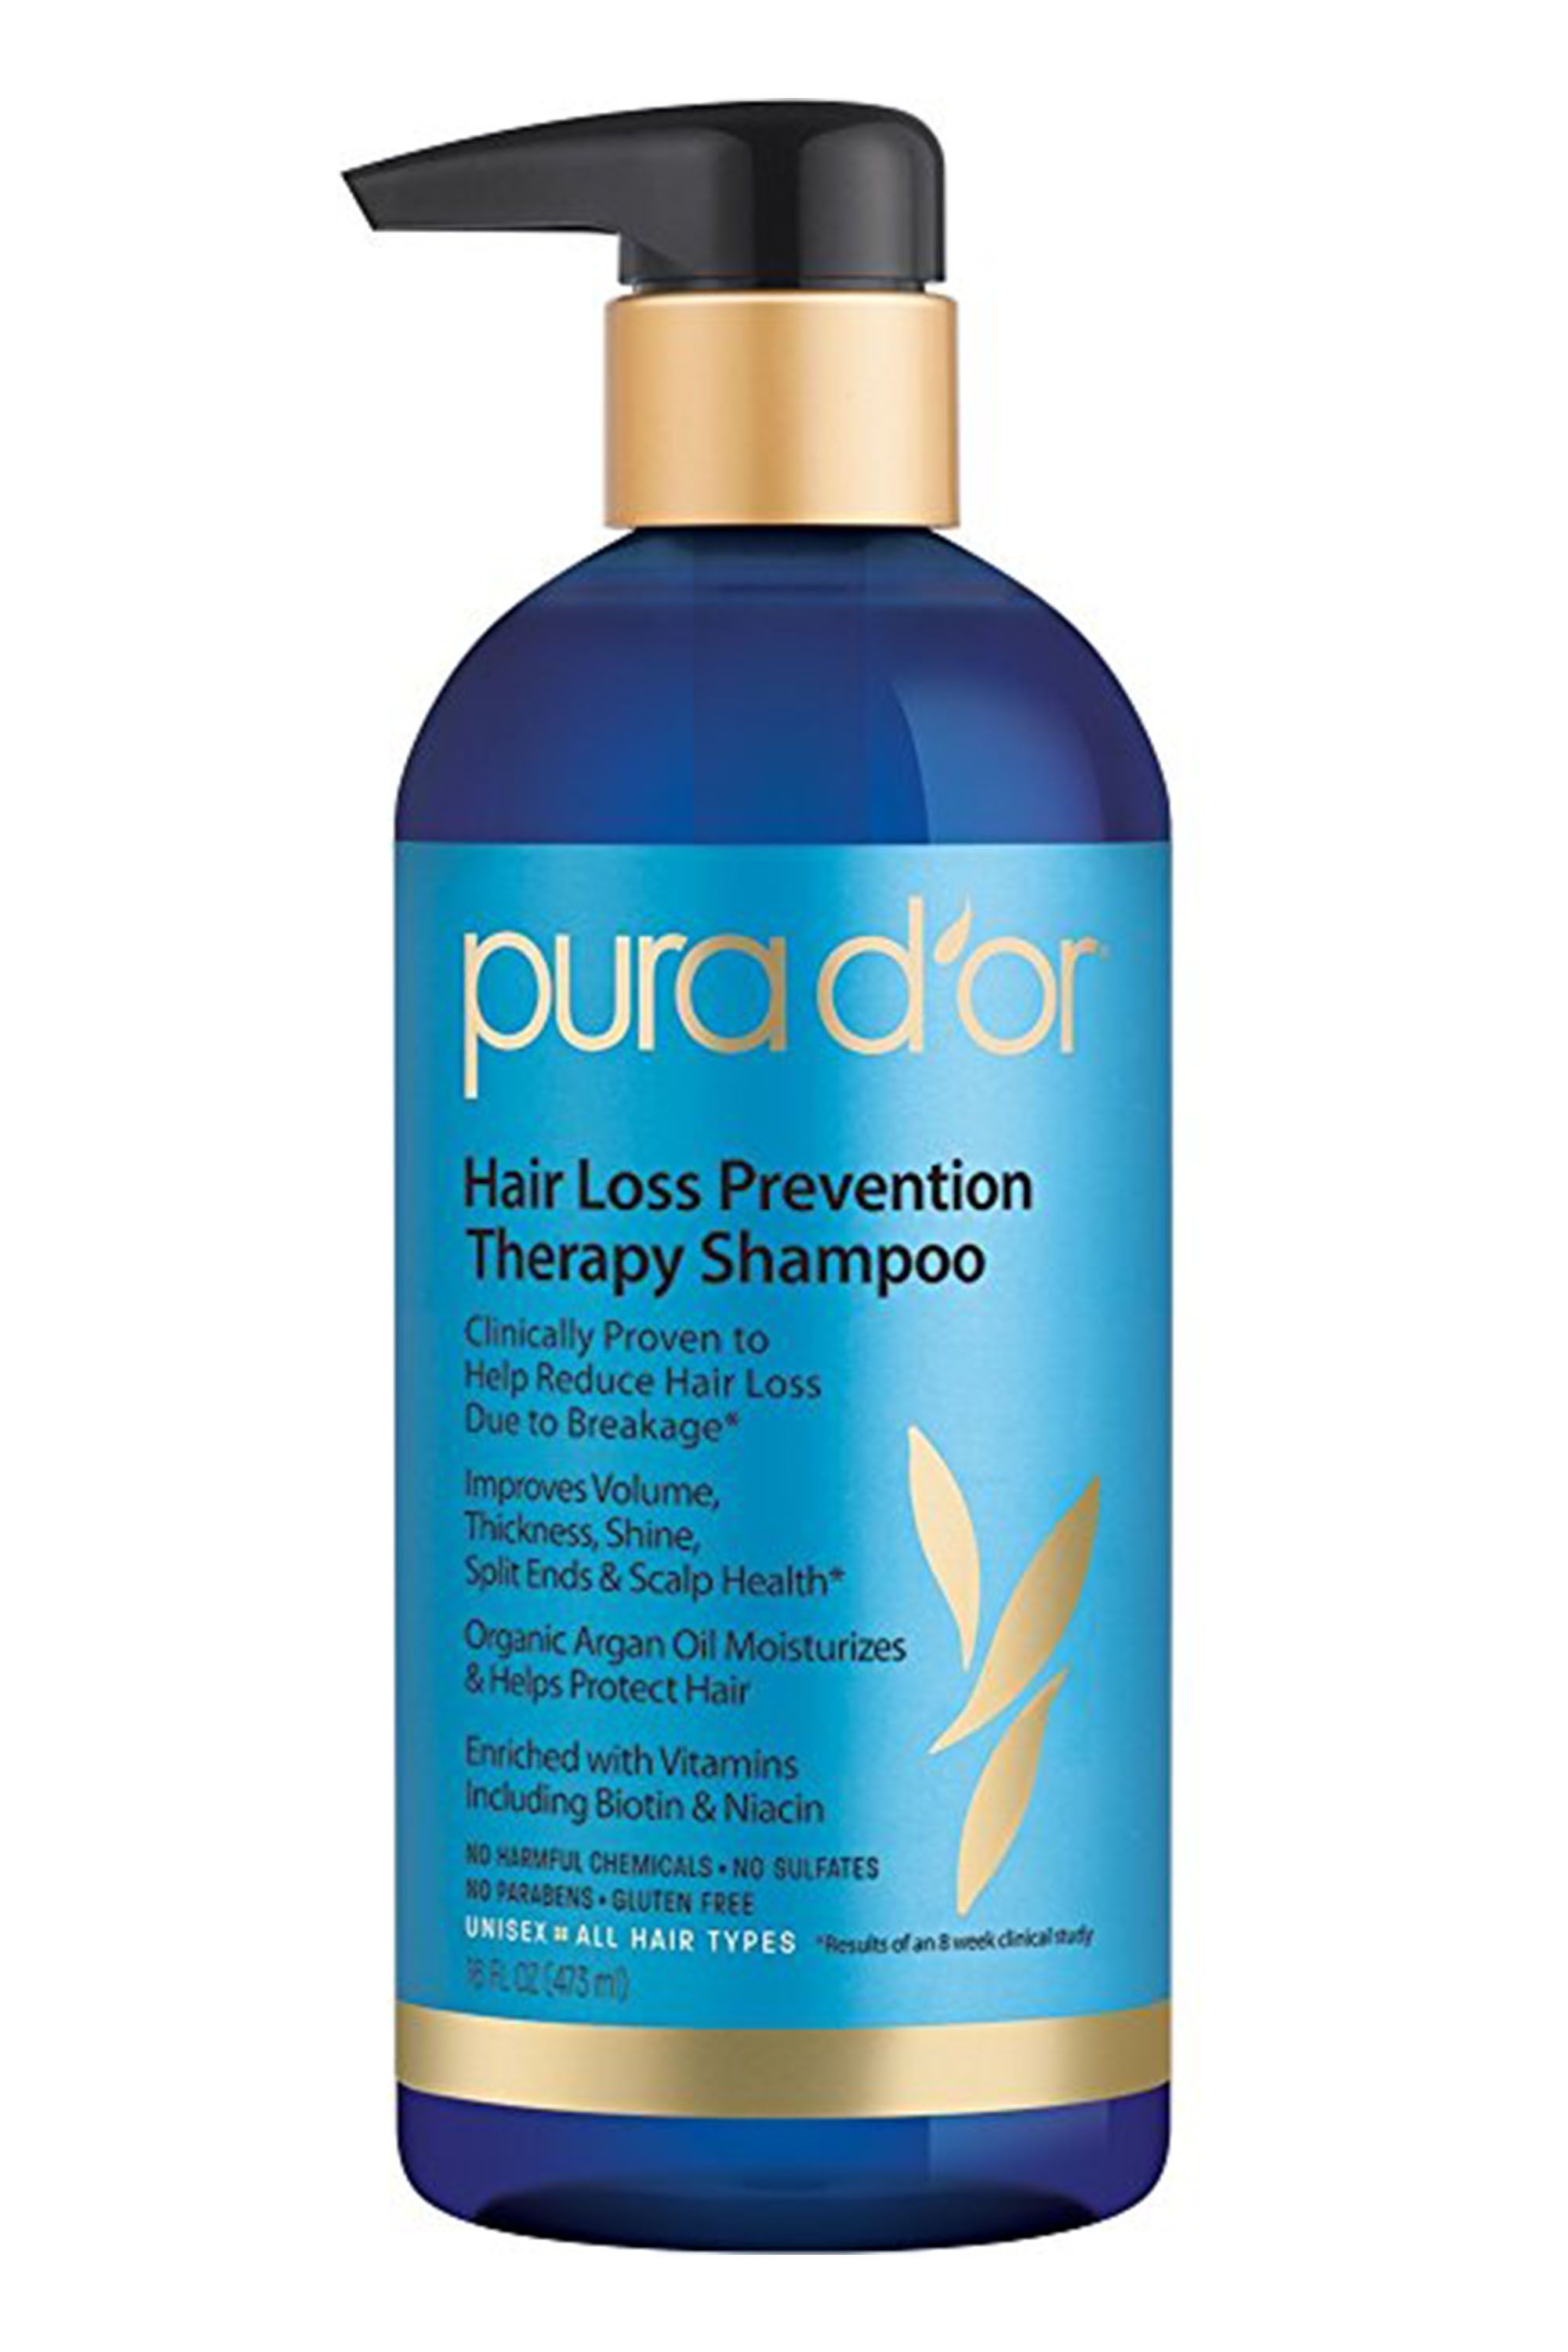 11 best hair growth shampoos - shampoo products to prevent hair loss